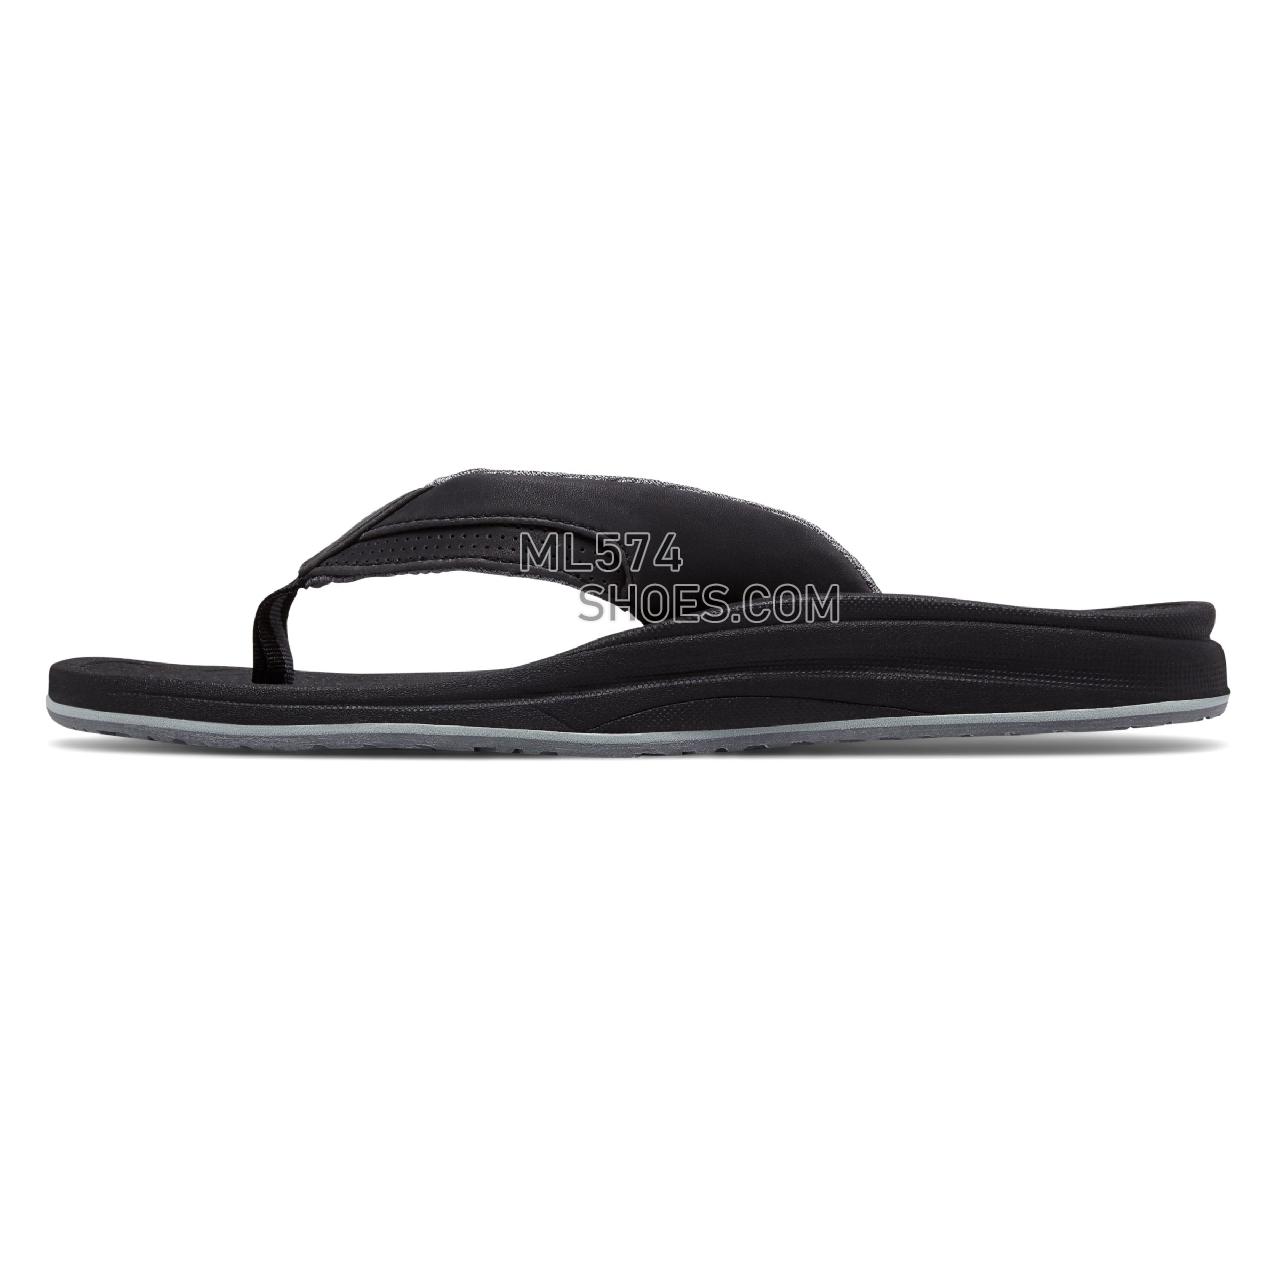 New Balance PureAlign Recharge Thong - Men's 6080 - Sandals Black with Grey - M6080BGR